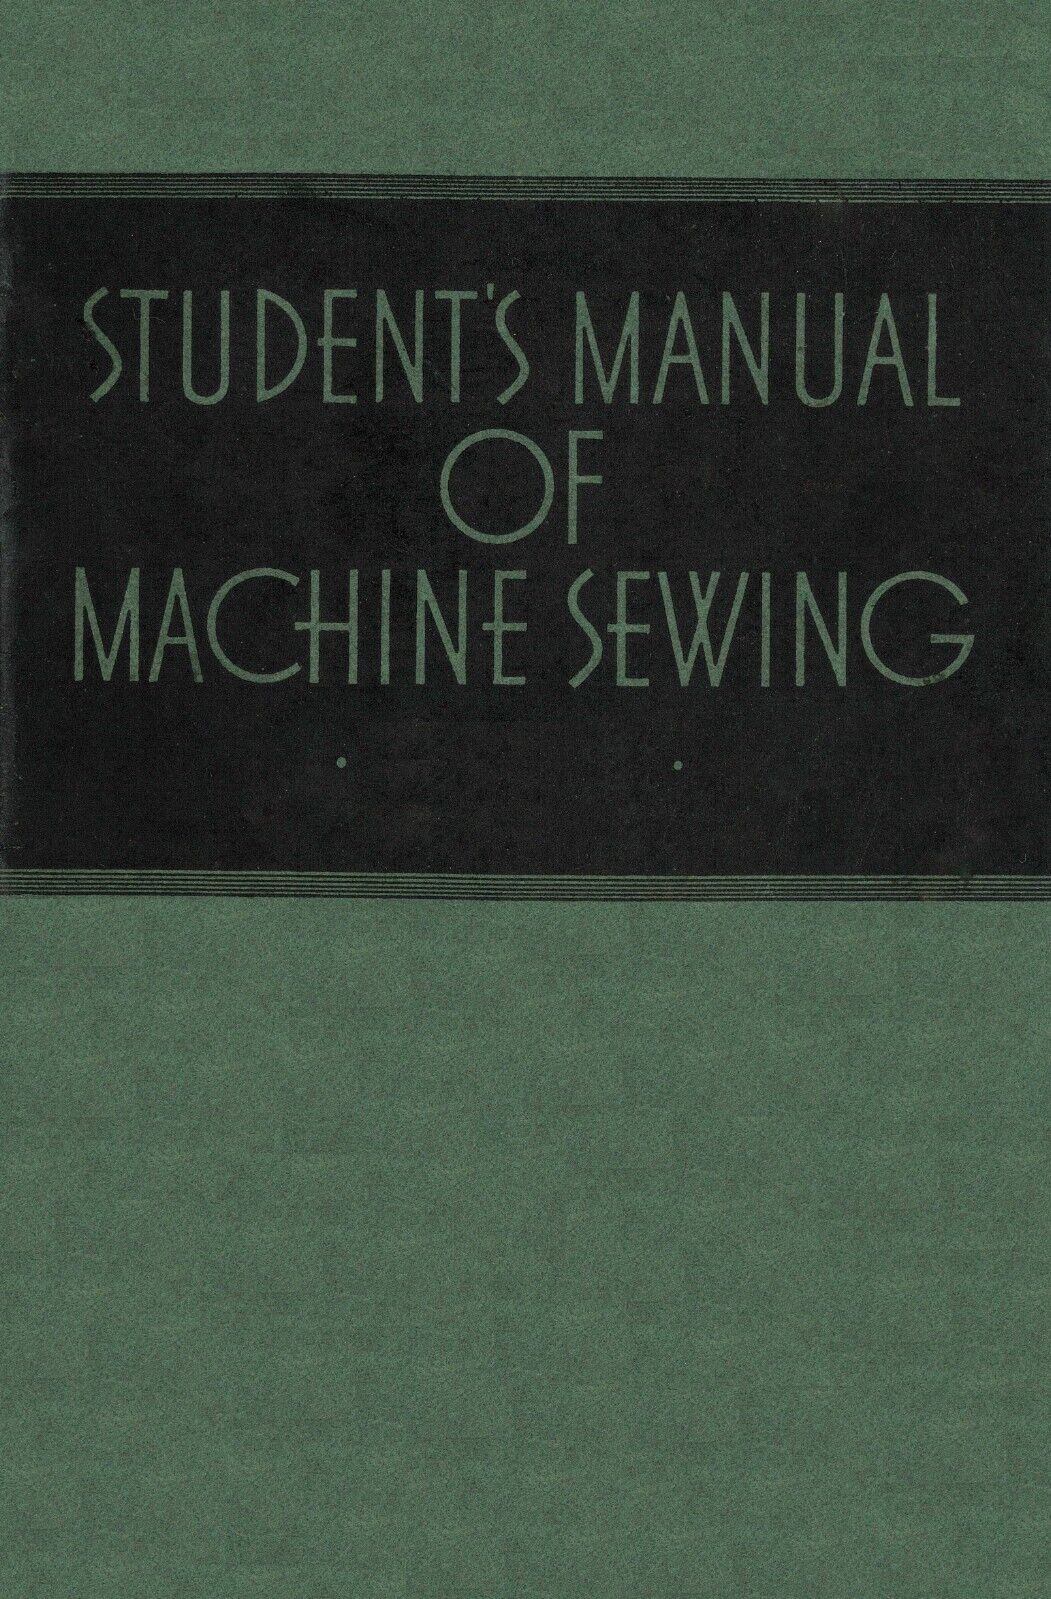 Students Manual of Sewing for Singer Machine & Attachments 221 Featherweight